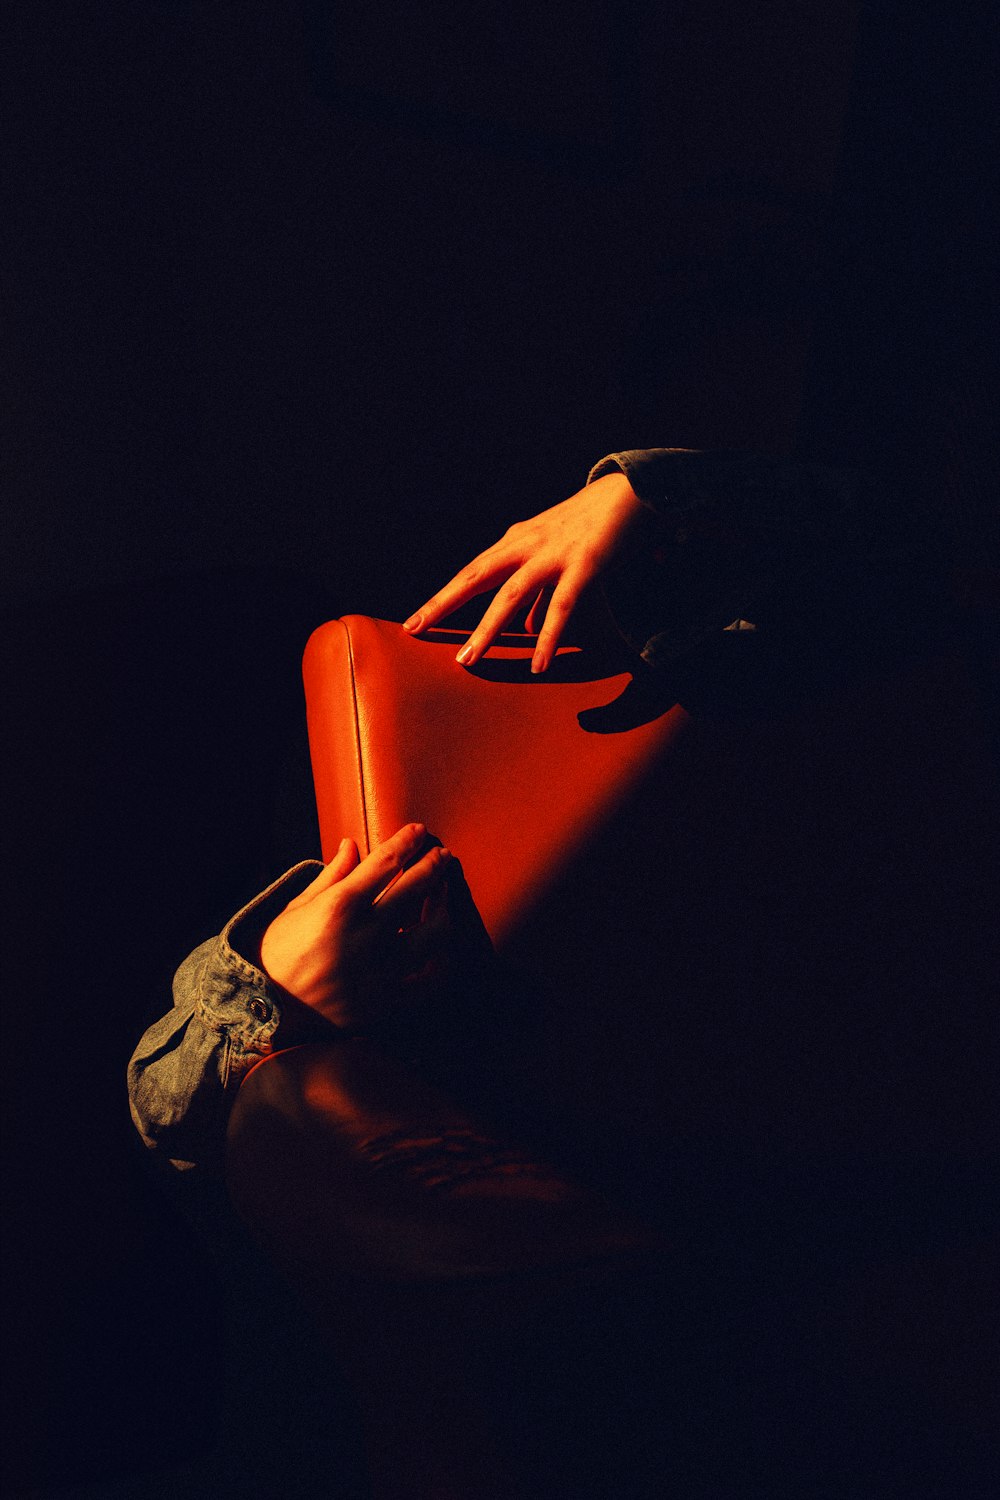 a person holding a red suitcase in the dark